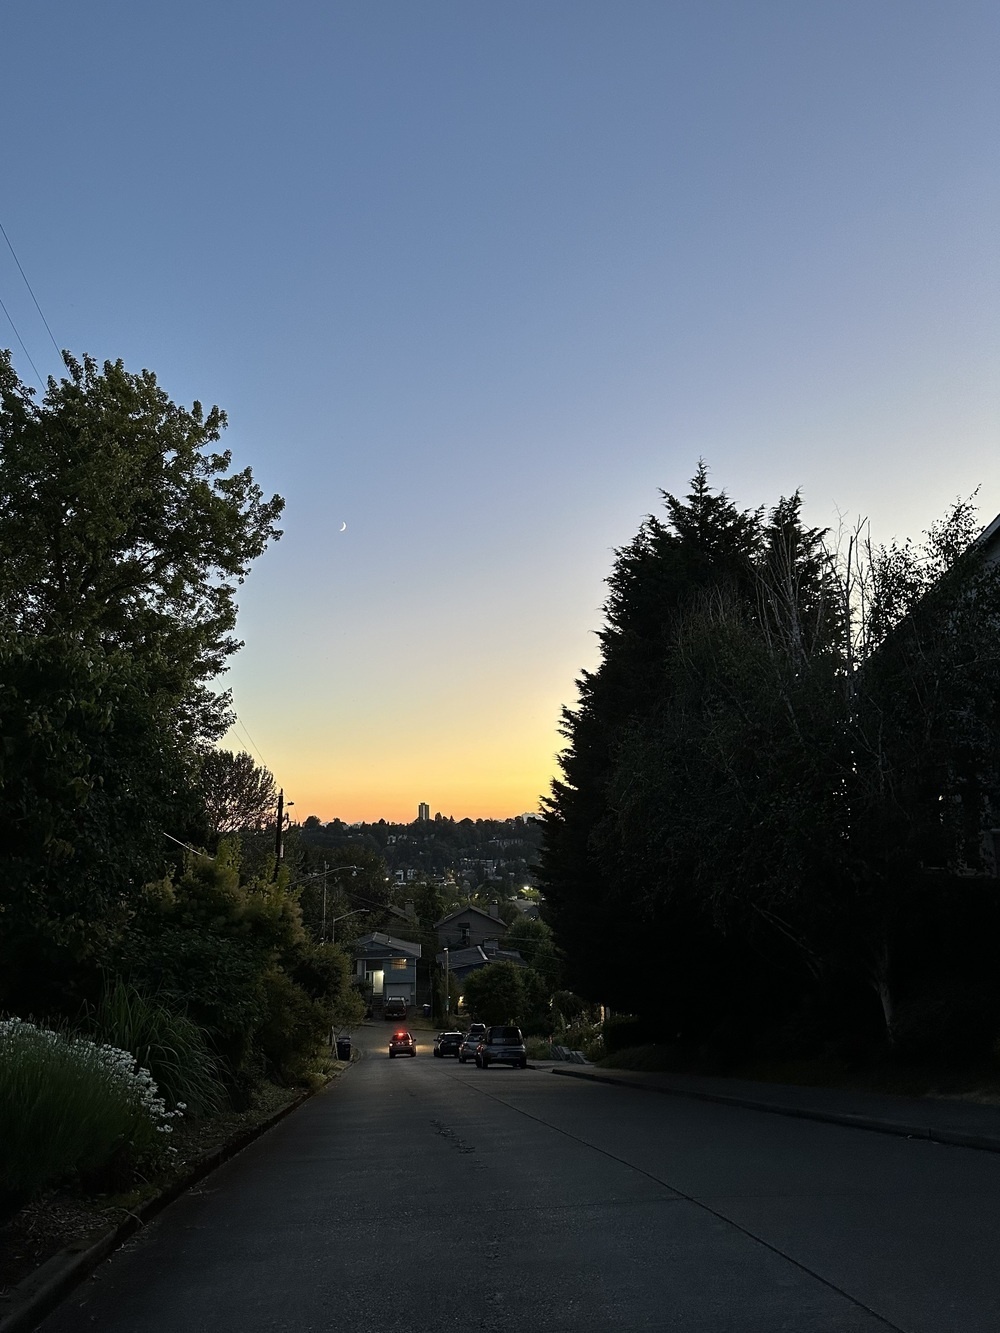 A hill leads away towards a distant city skyline. It’s a steep hill, darkening homes and trees sit on each side, and the horizon is faintly orange. There is a tiny sliver of moon above the horizon. 